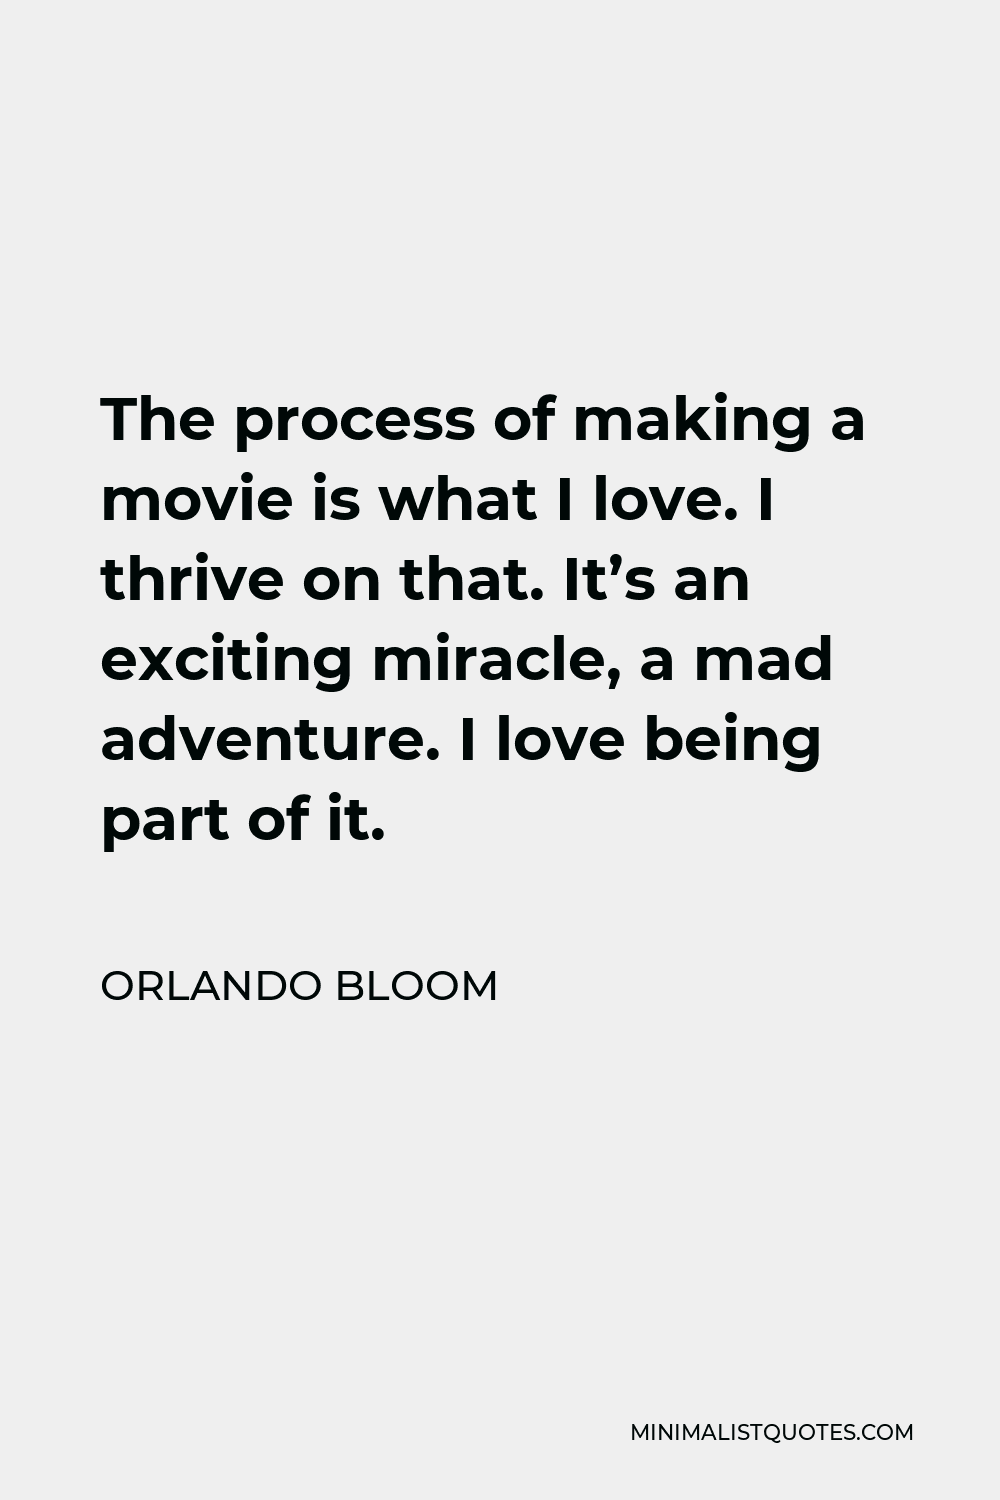 Orlando Bloom Quote - The process of making a movie is what I love. I thrive on that. It’s an exciting miracle, a mad adventure. I love being part of it.